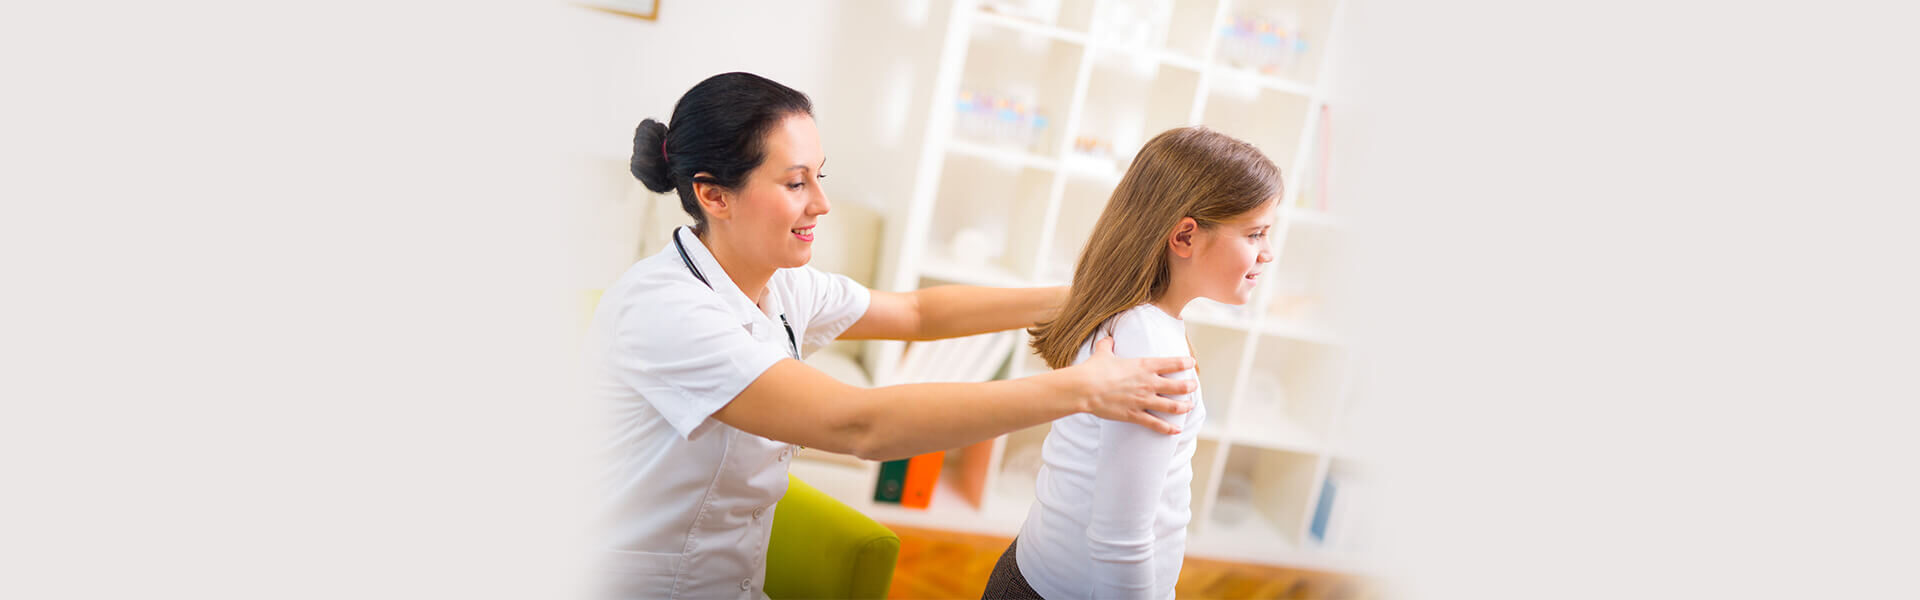 Pediatric Chiropractic Services Near You | Hoffman ...